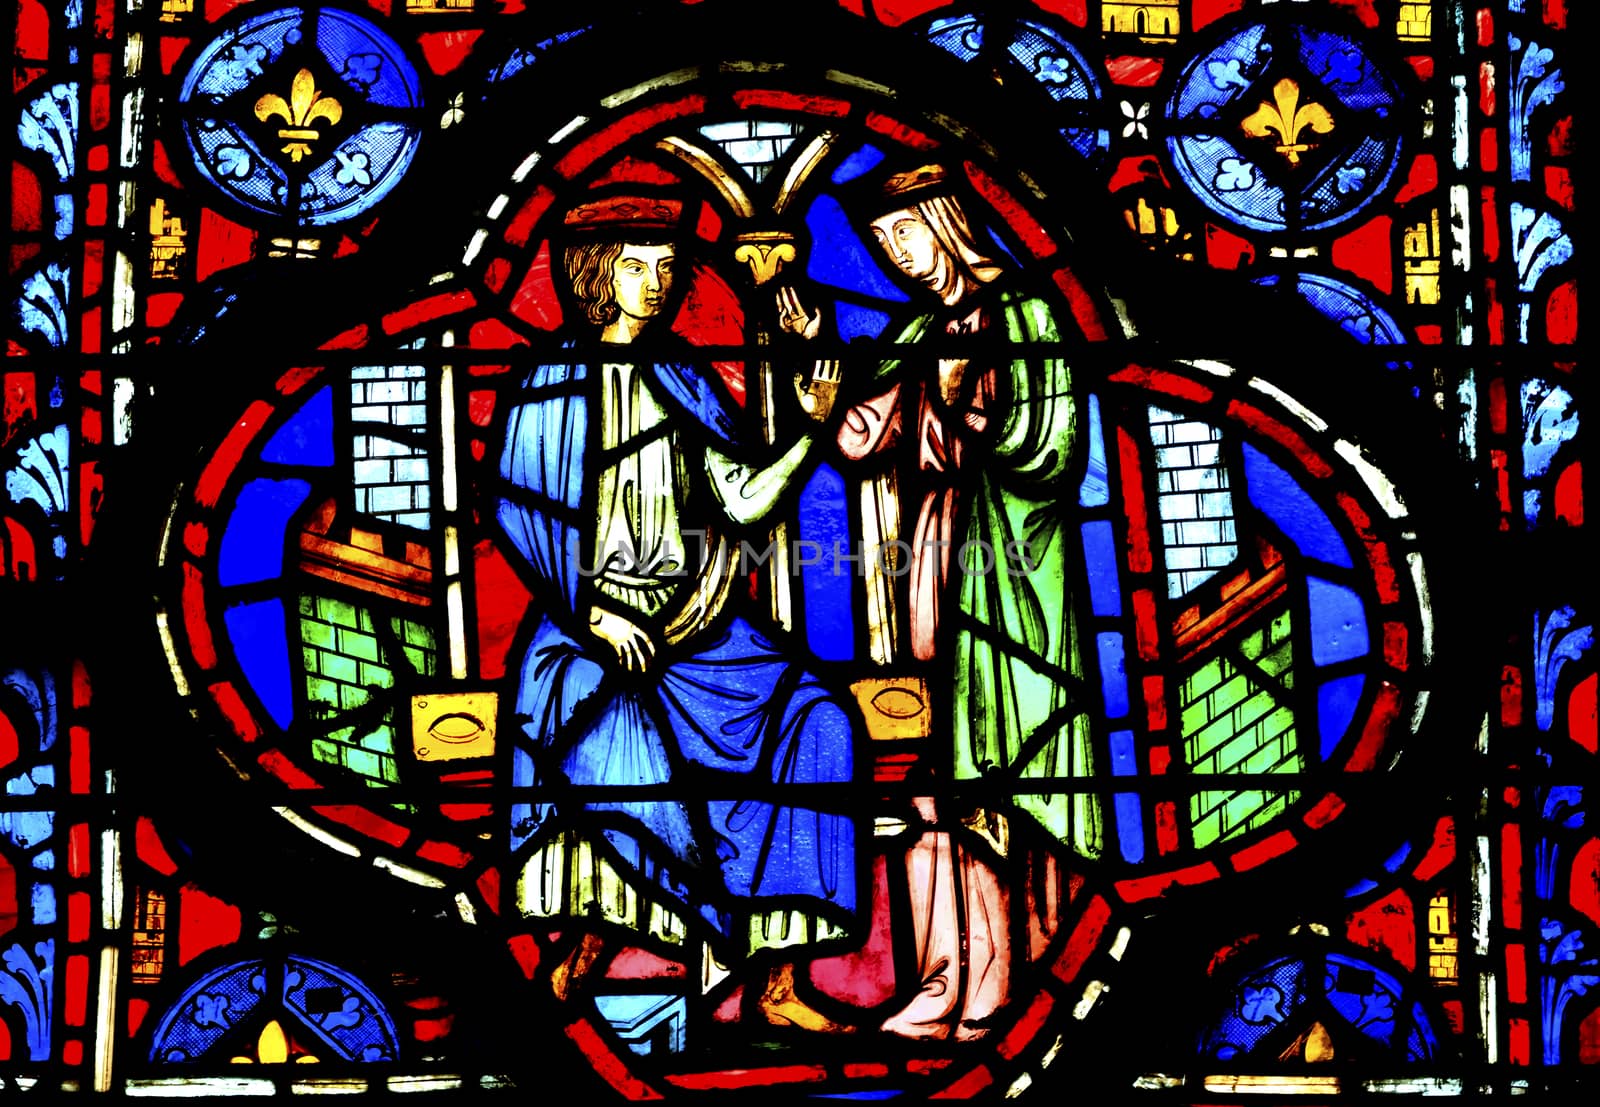 King Queen Medieval Life Stained Glass Saint Chapelle Paris France.  Saint King Louis 9th created Sainte Chapelle in 1248 to house Christian relics, including Christ's Crown of Thorns.  Stained Glass created in the 13th Century and shows various biblical stories along with stories from 1200s.